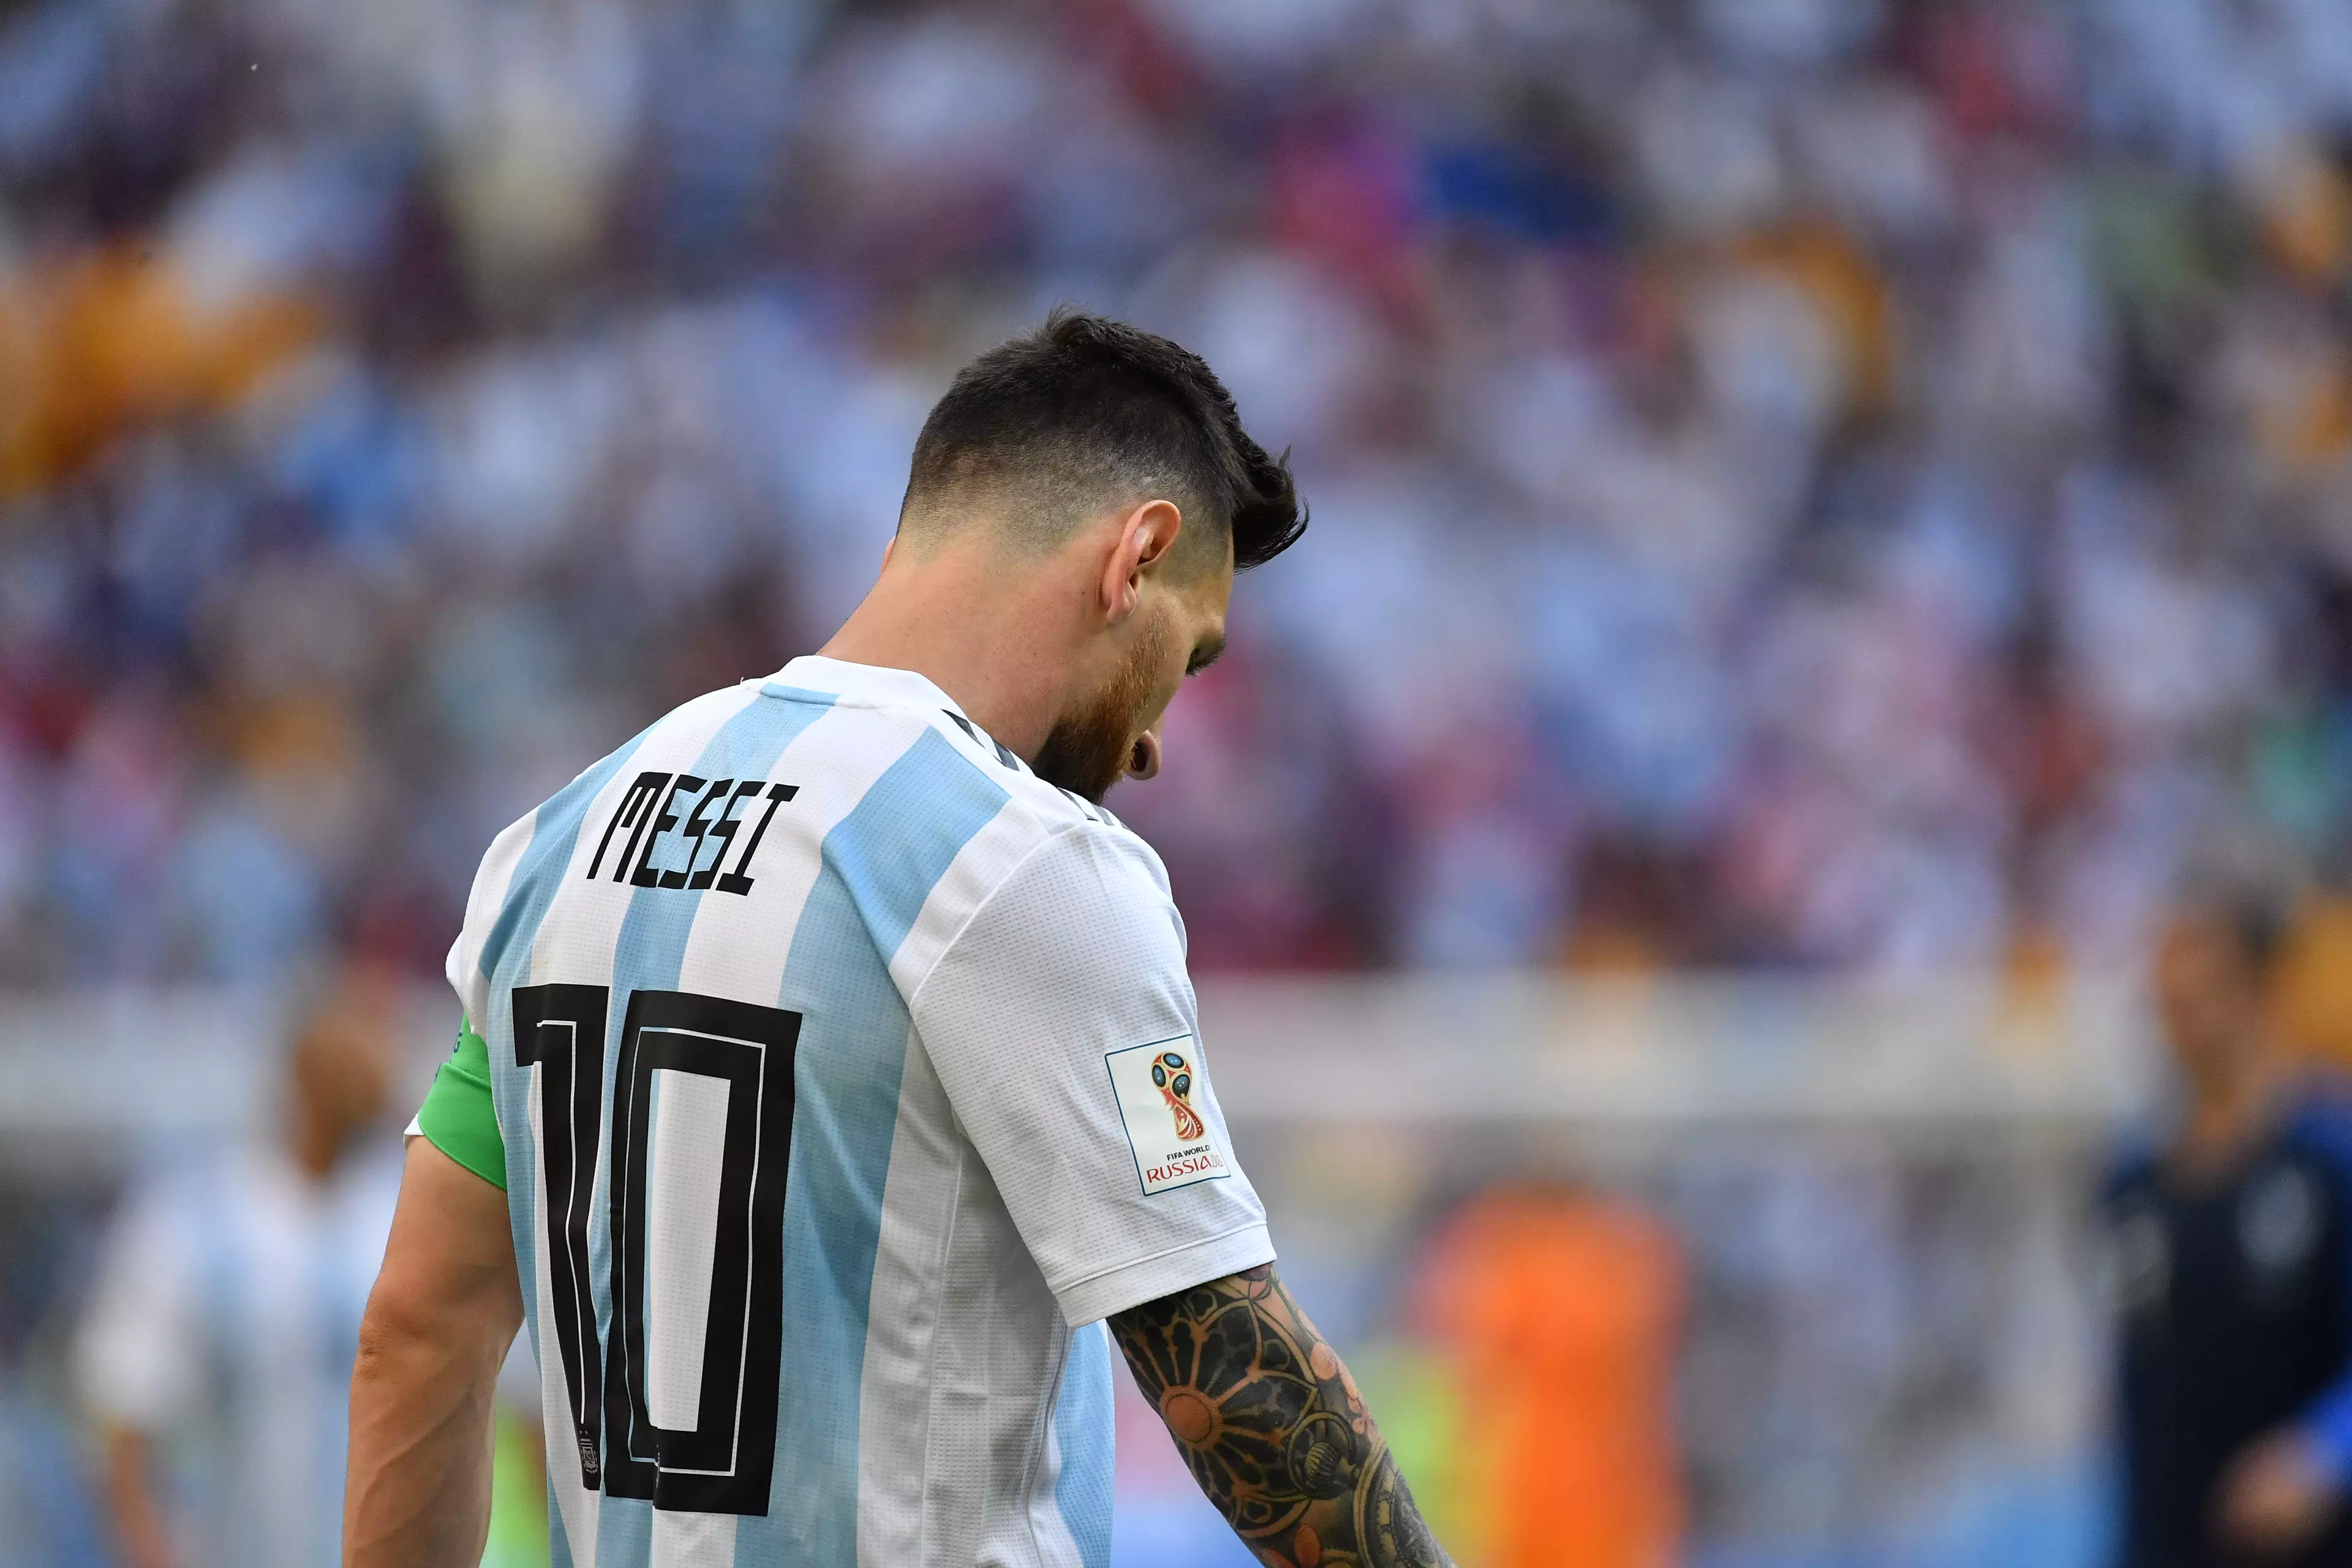 Messi and Argentina were knocked out of the second round of the World Cup. Image: PA Images